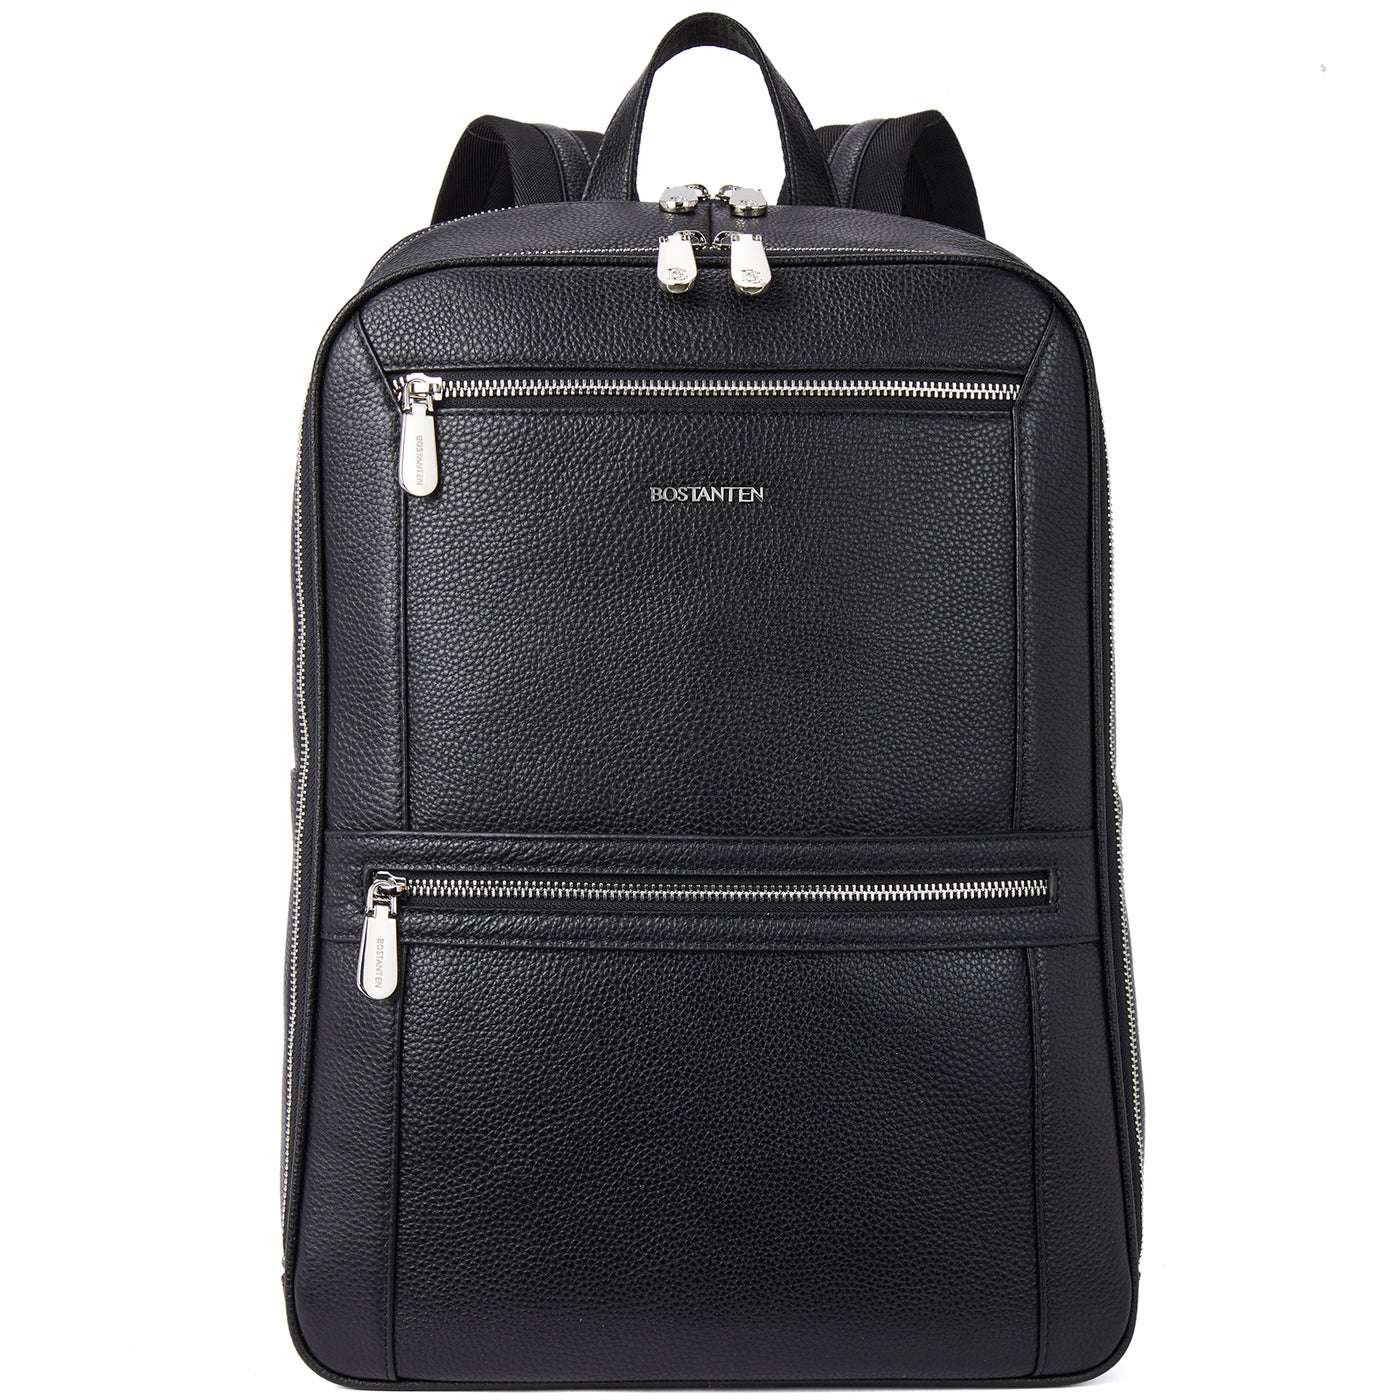 Large Men's Leather Backpack - Perfect for School and Travel